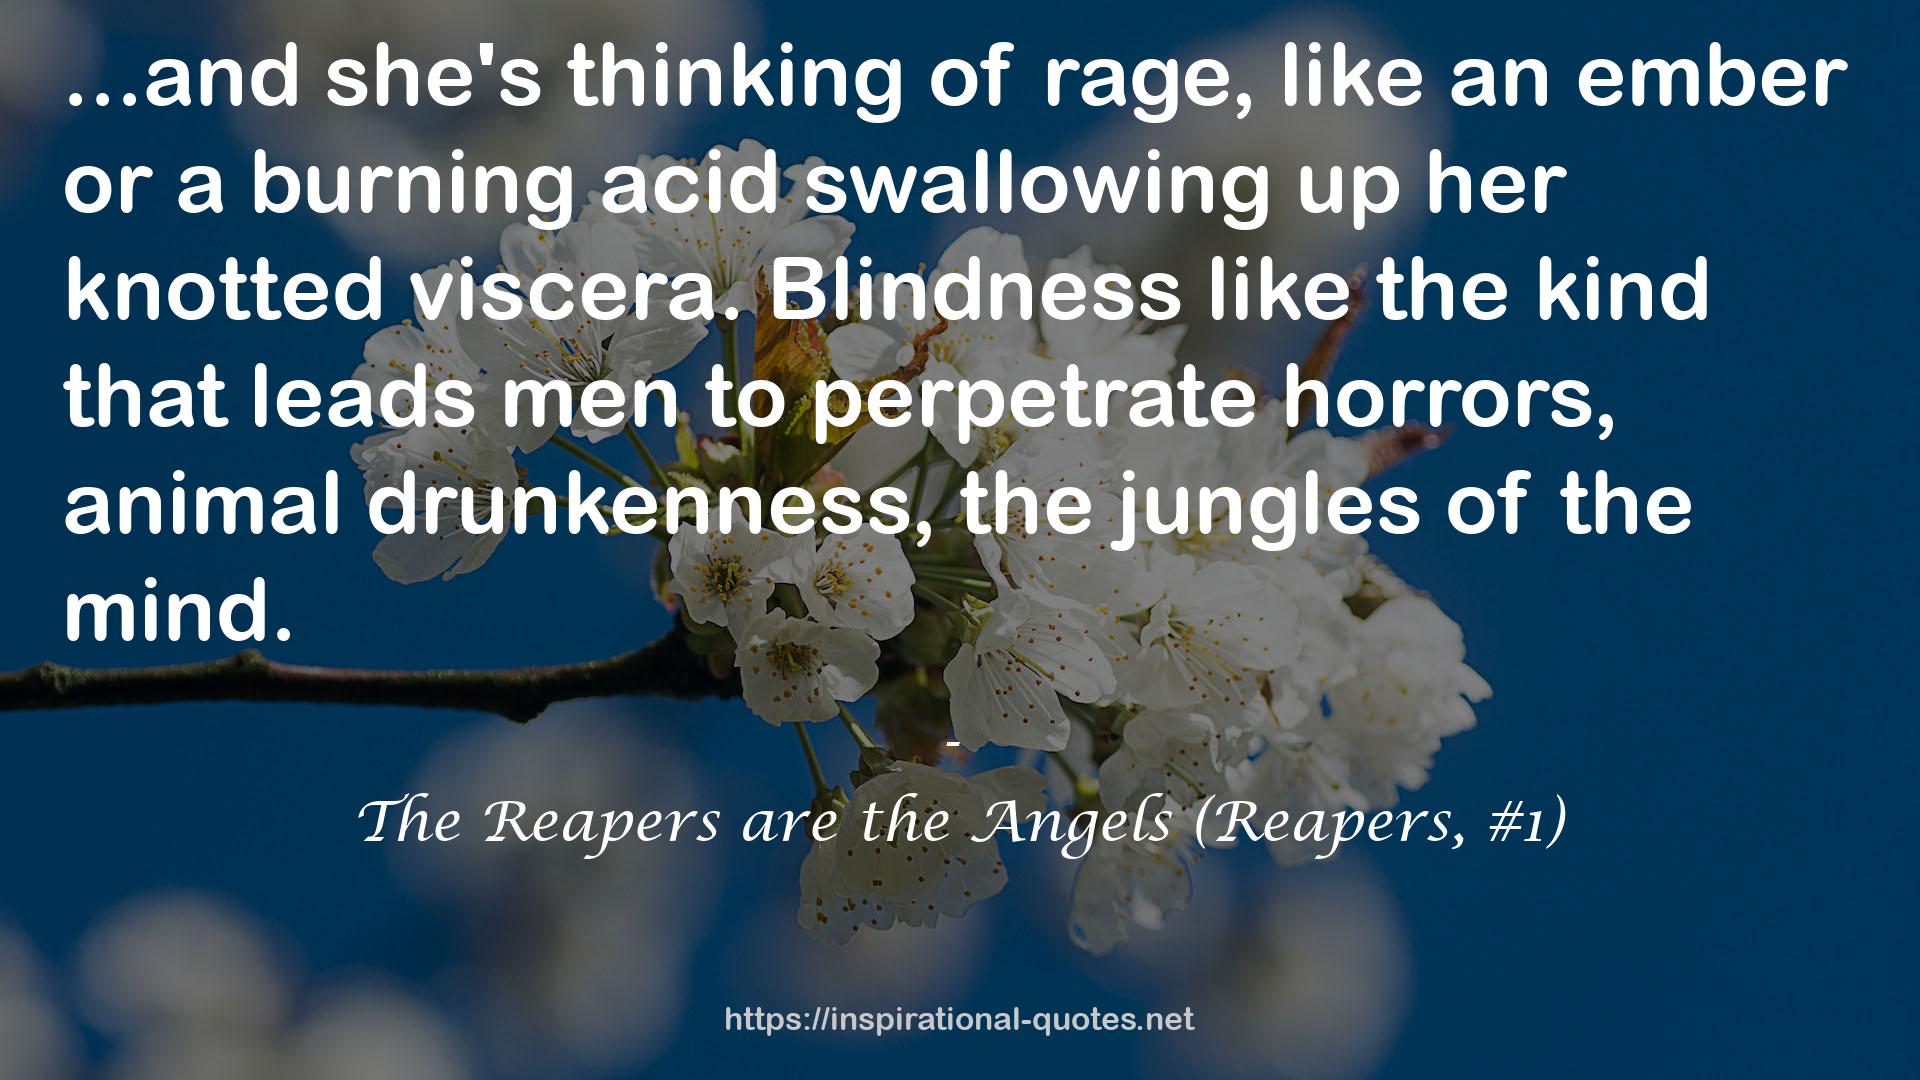 The Reapers are the Angels (Reapers, #1) QUOTES